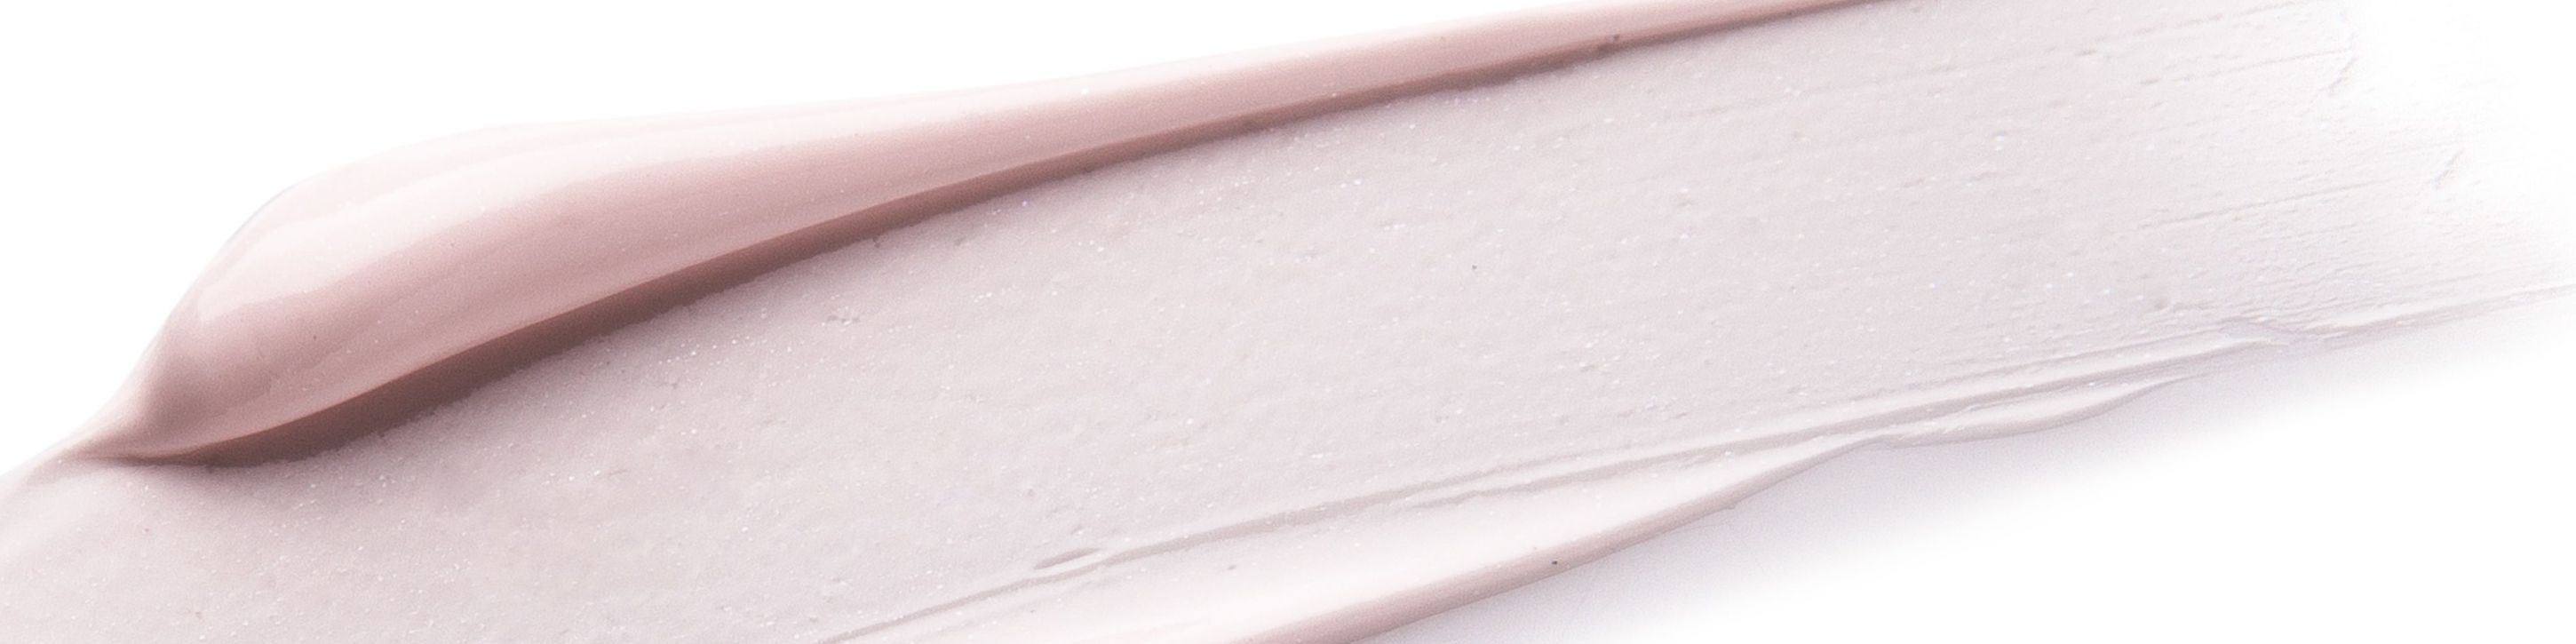 Mineral primer swatch in a pearlescent shade from InClinic Cosmetics